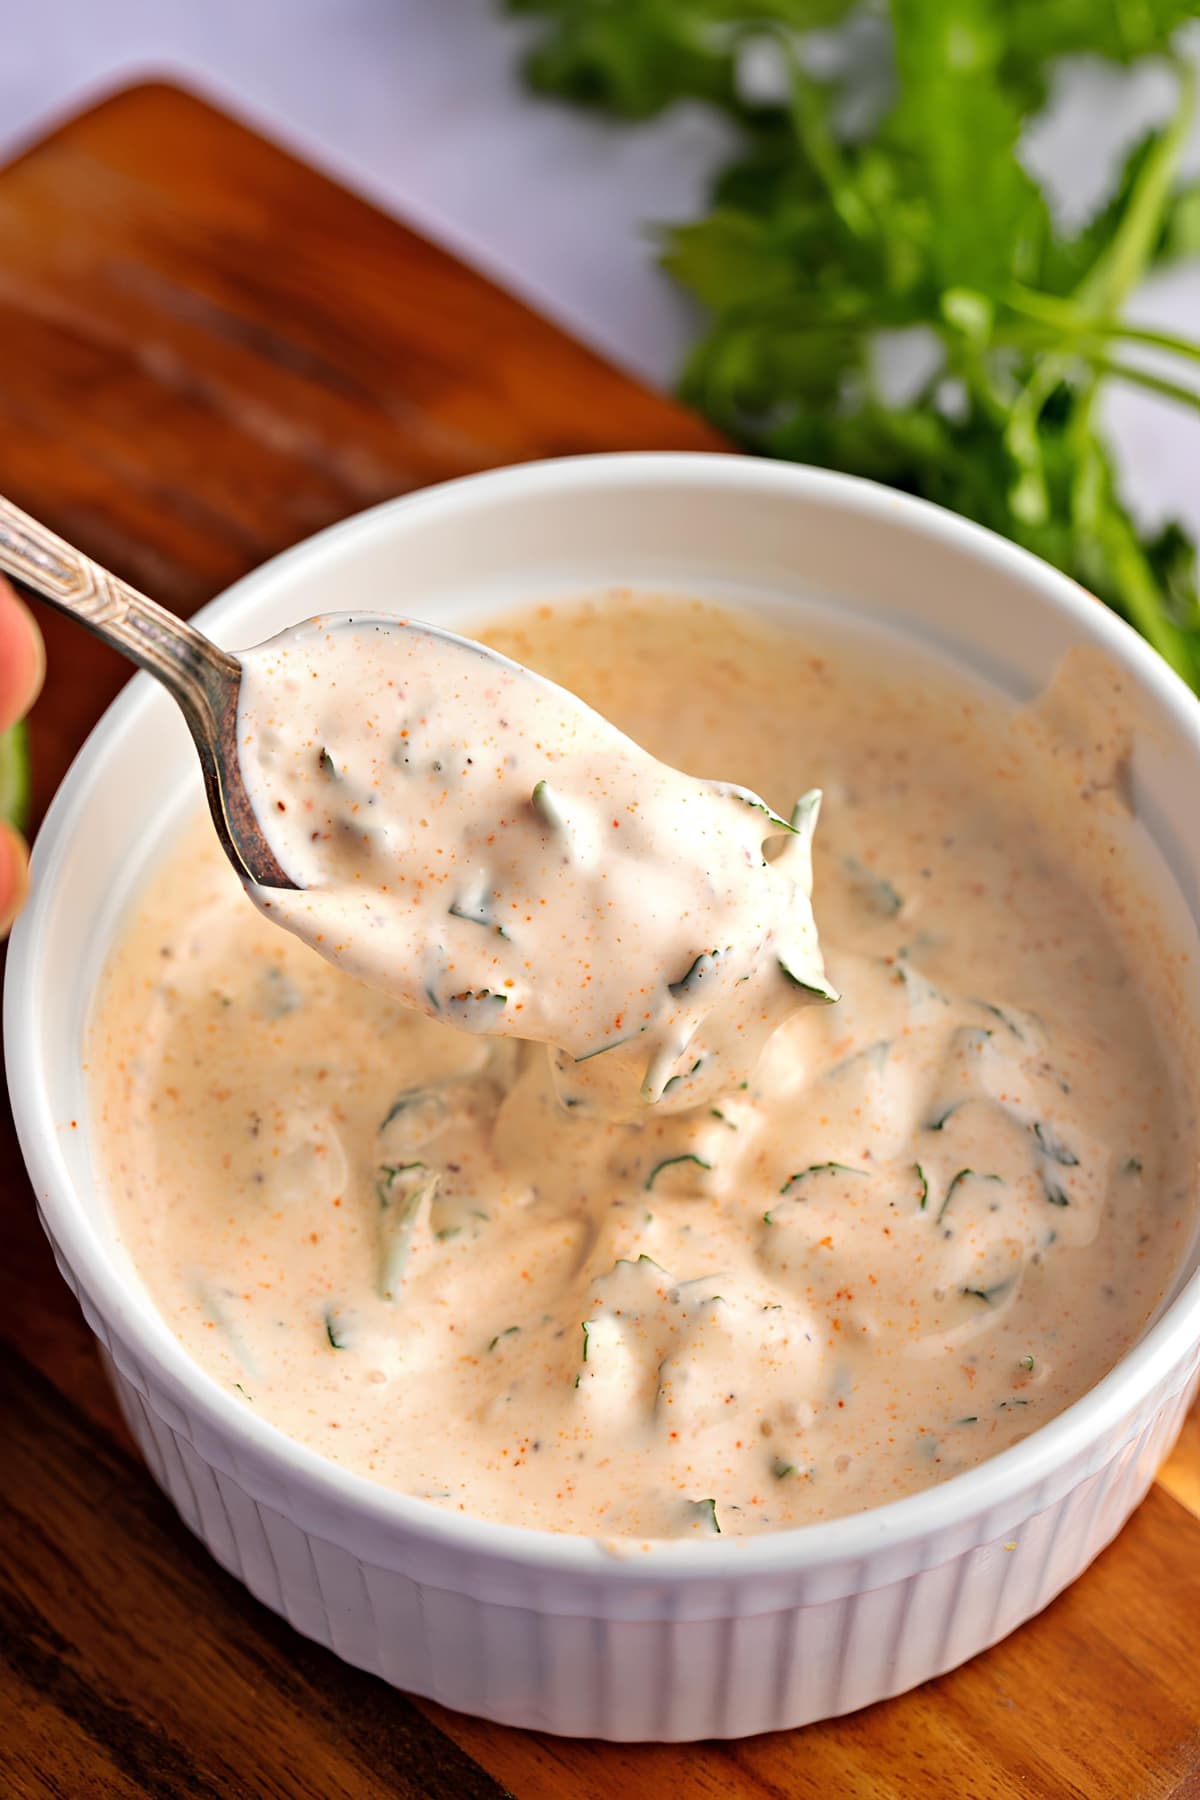 Creamy Baja sauce scooped with a spoon in a small dish bowl.